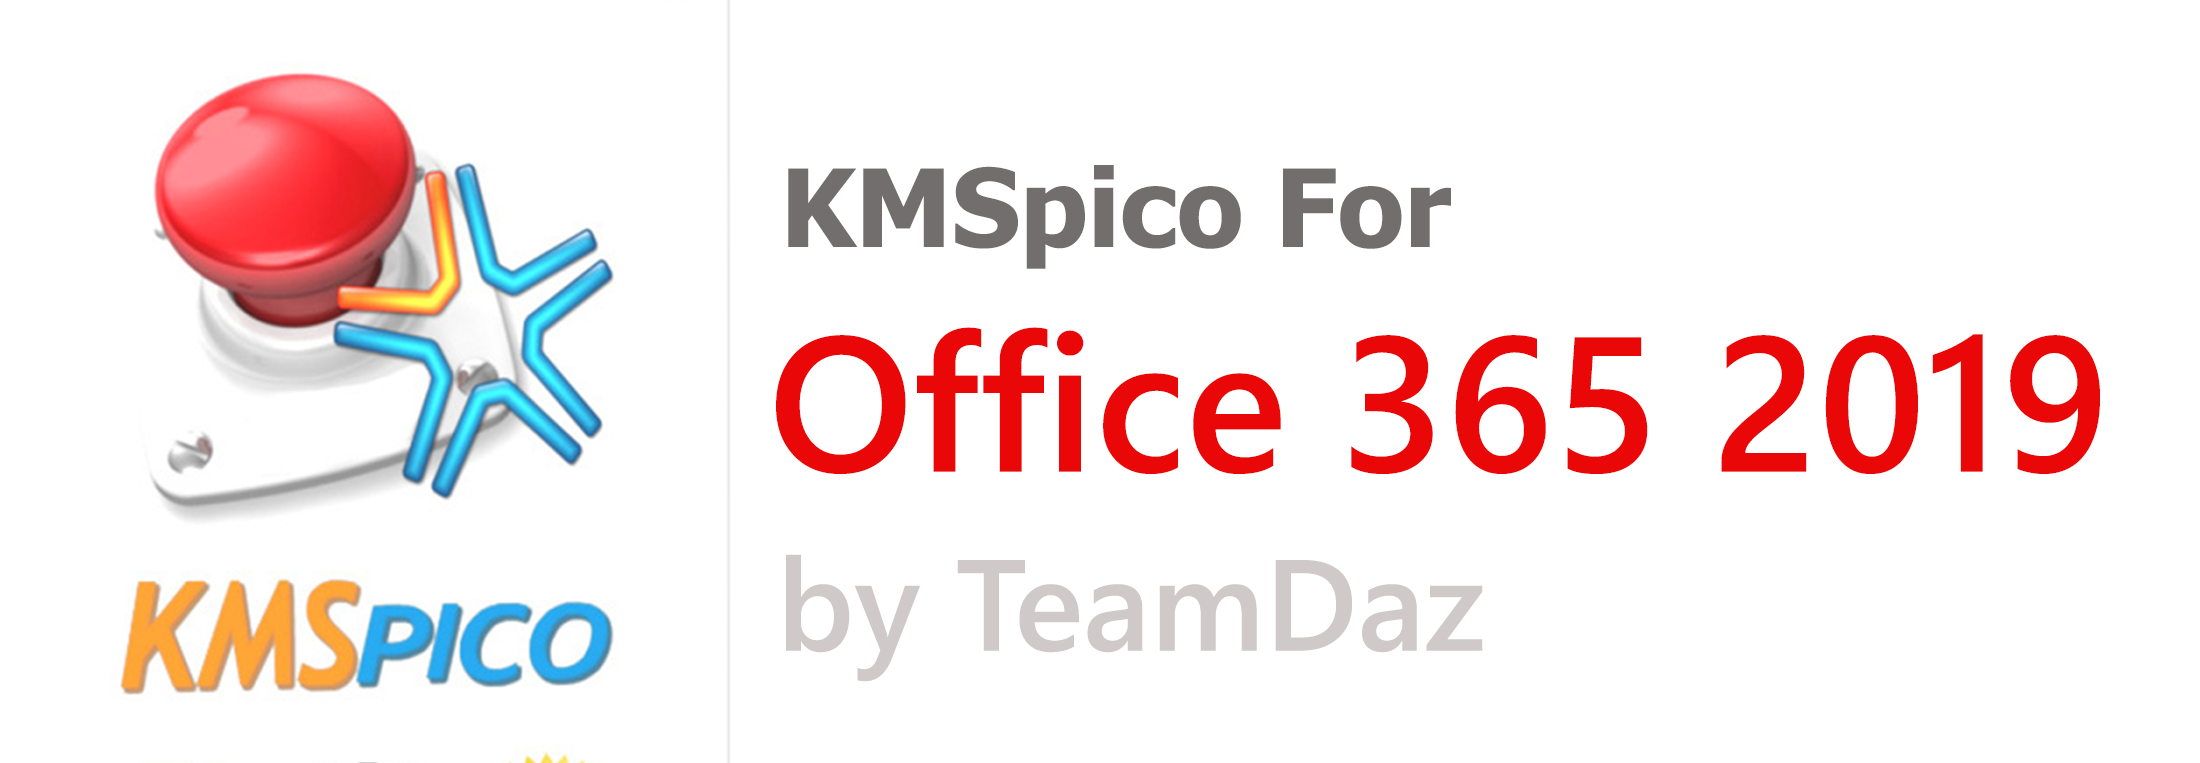 kmspico for office 2019